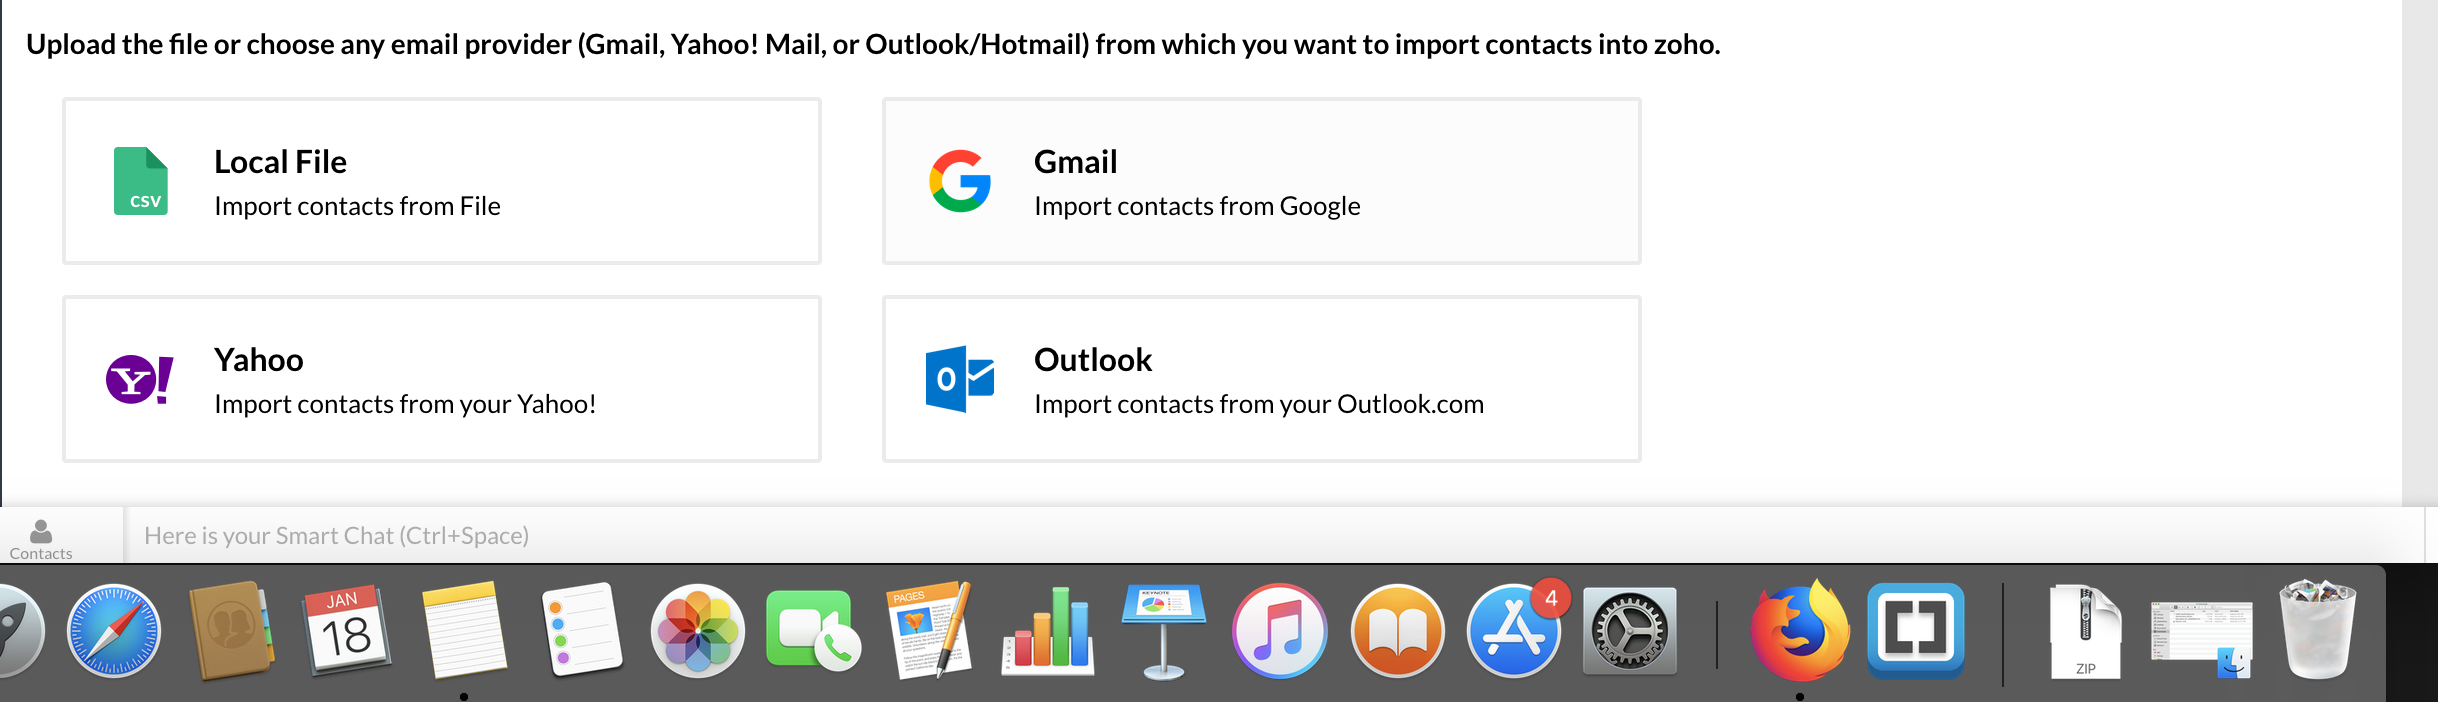 how can i import contacts to outlook from csv